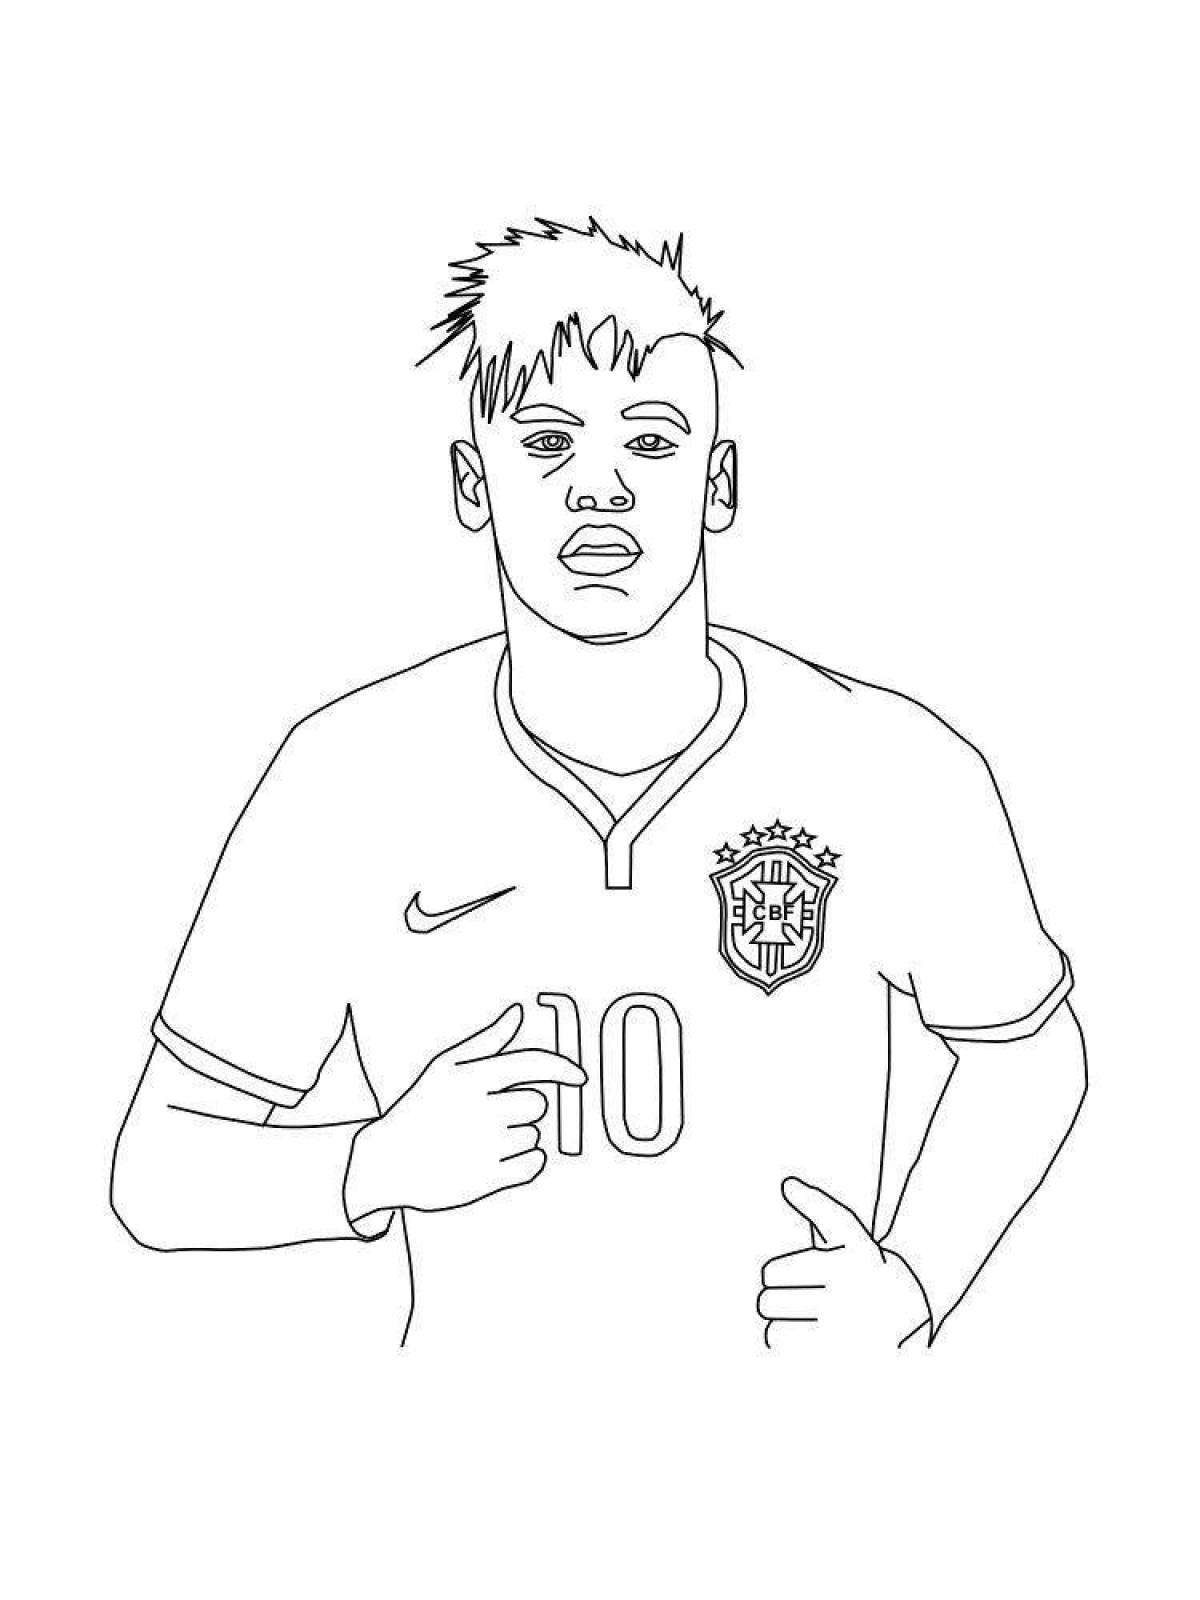 Pele's playful coloring page